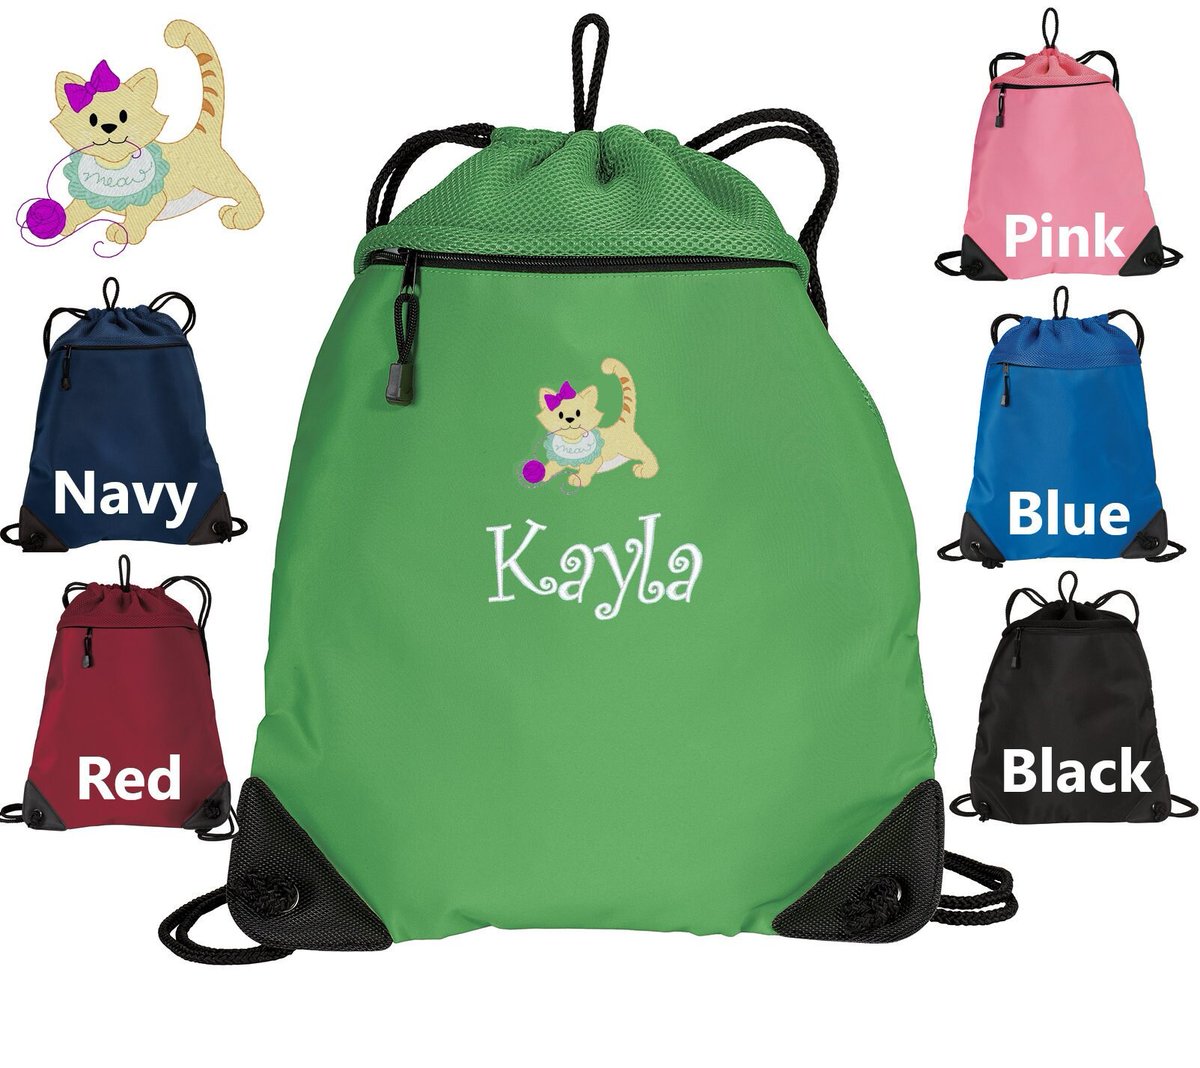 Personalized Kids Cinch Pack, Drawstring Gym School PE Pool Backpack, Embroidered Baby Kitty Cat, Monogrammed Custom Name, Kids Gift etsy.com/listing/700912…
 #personalized #BoysGift